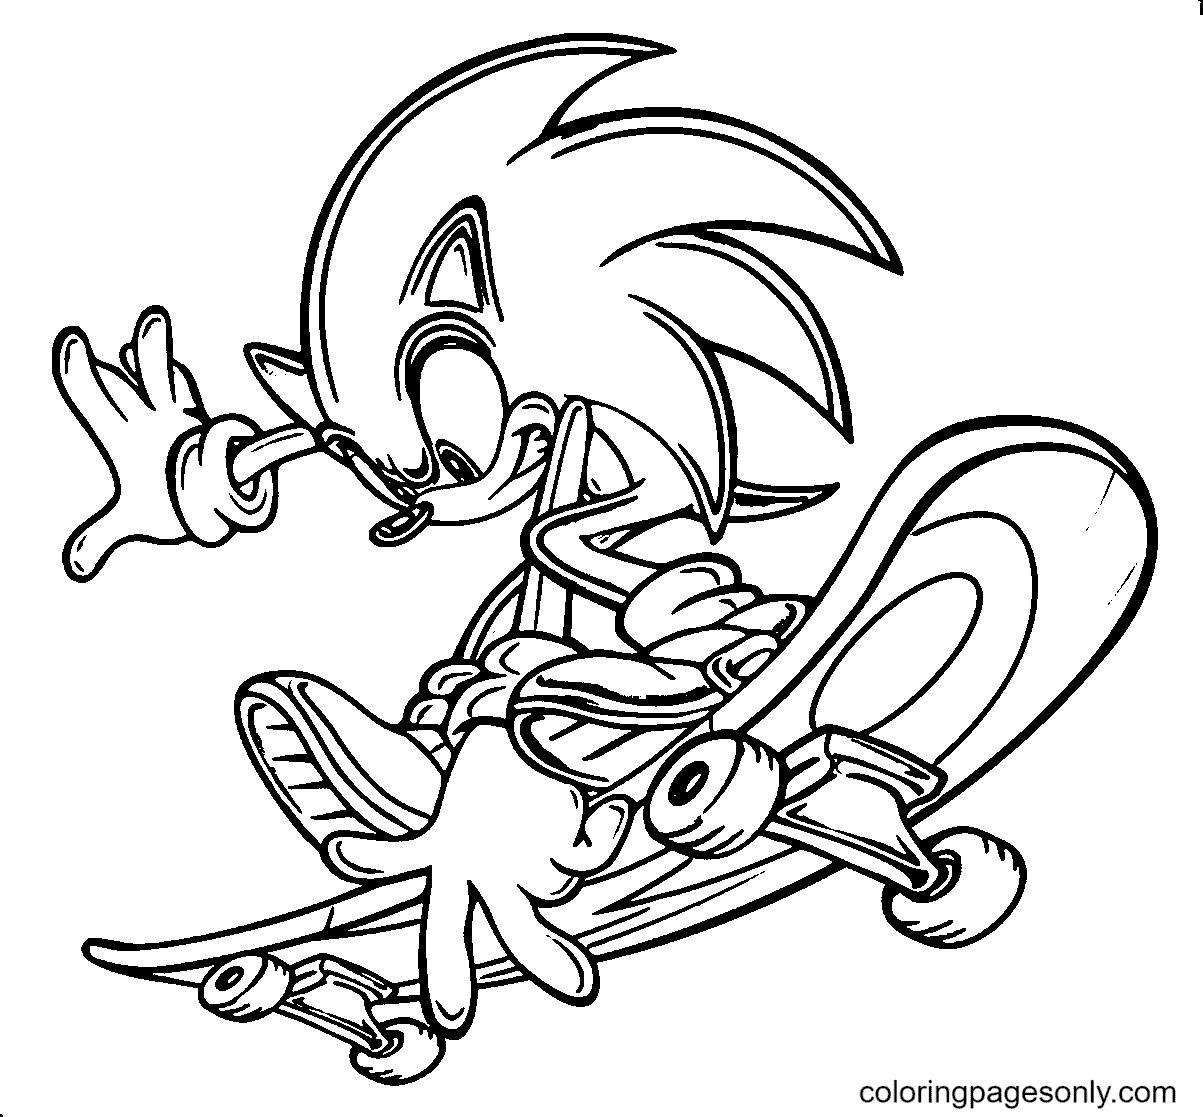 Sonic Skateboarding Coloring Page